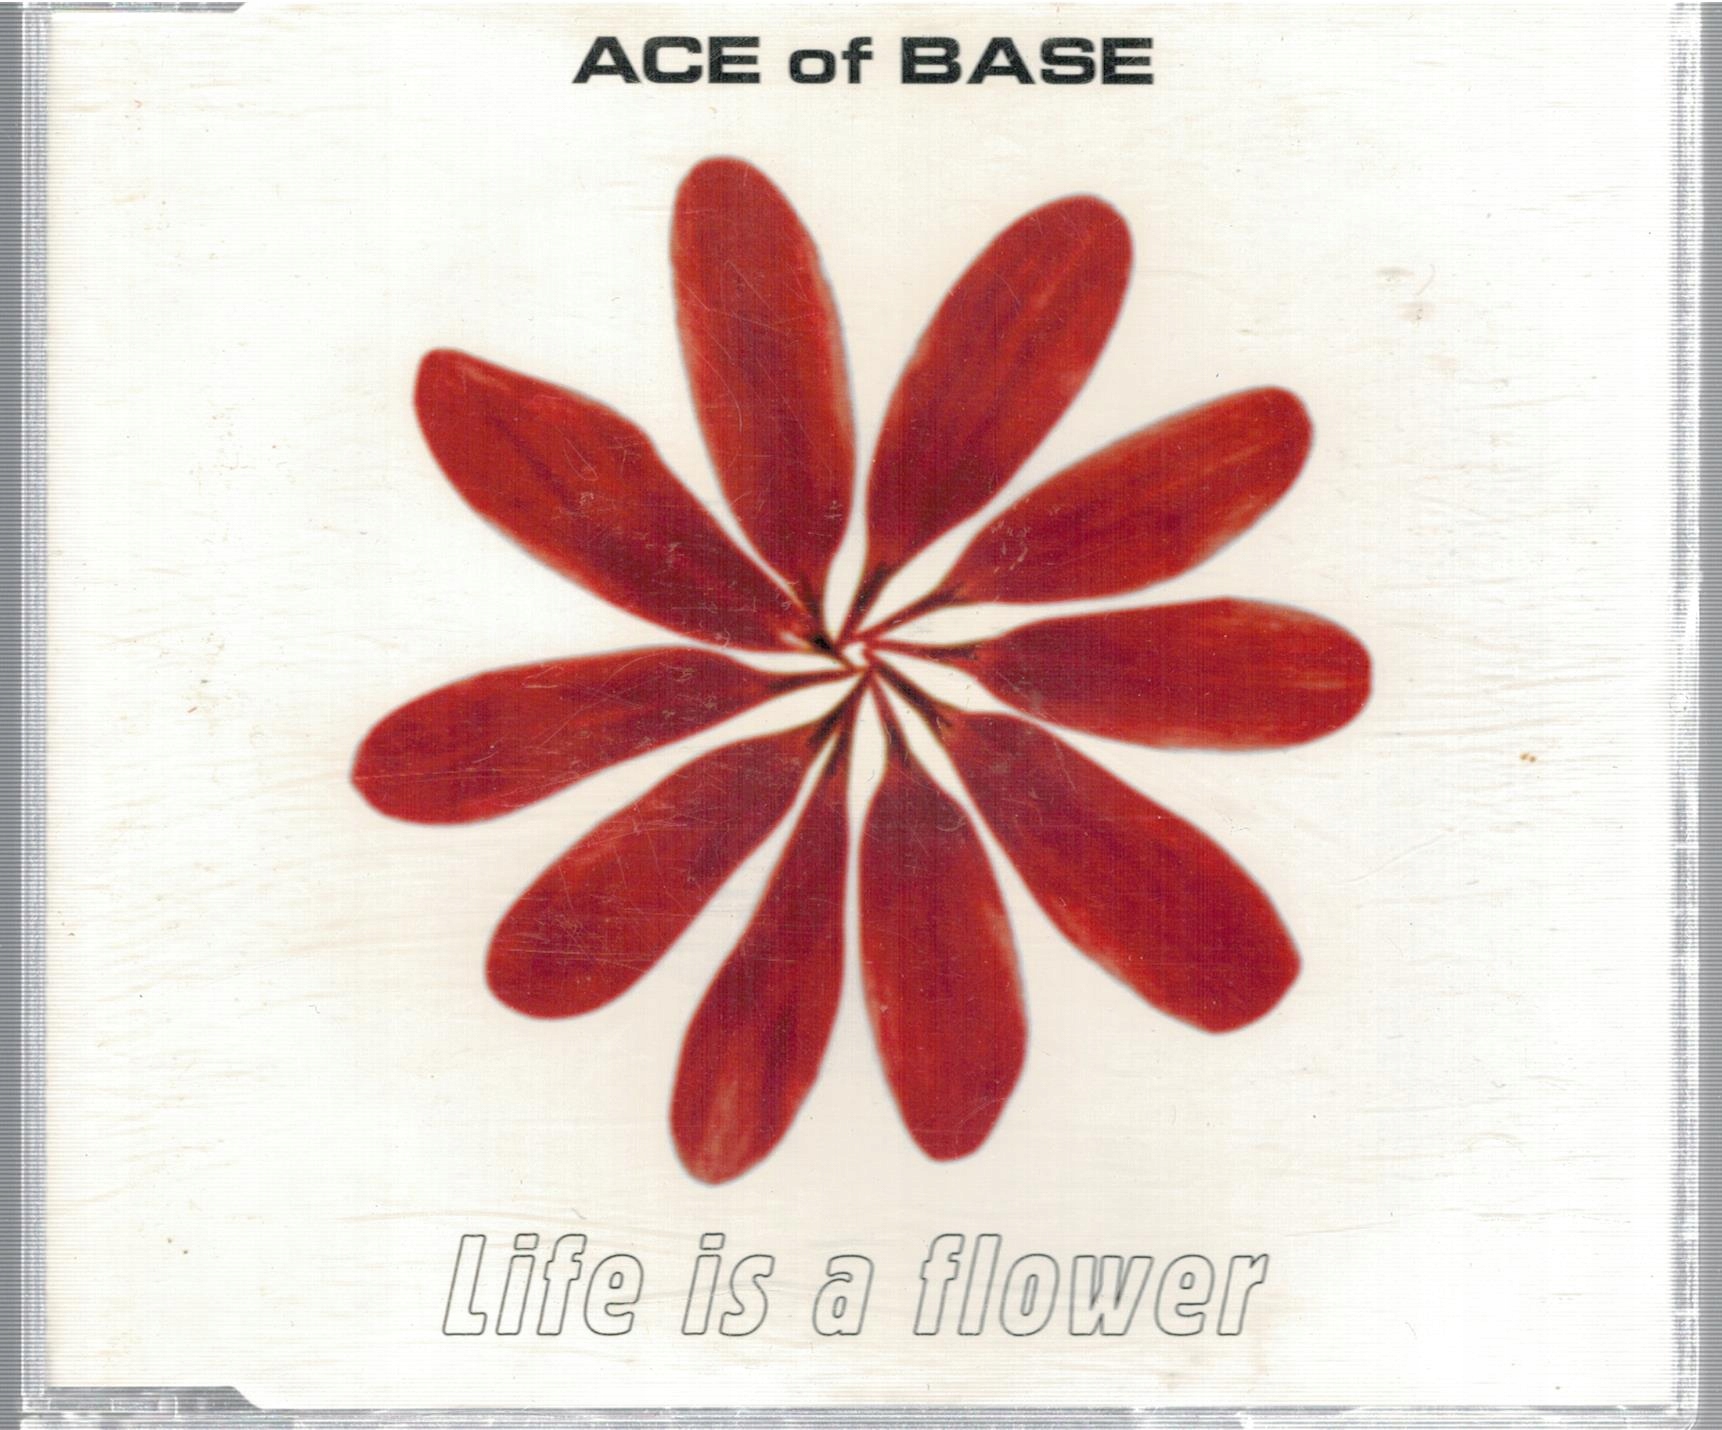 Life is a flower. Life is a Flower Ace of Base. Ace of Base "Flowers". Ace of Base Flowers 1998. Ace of Base album.